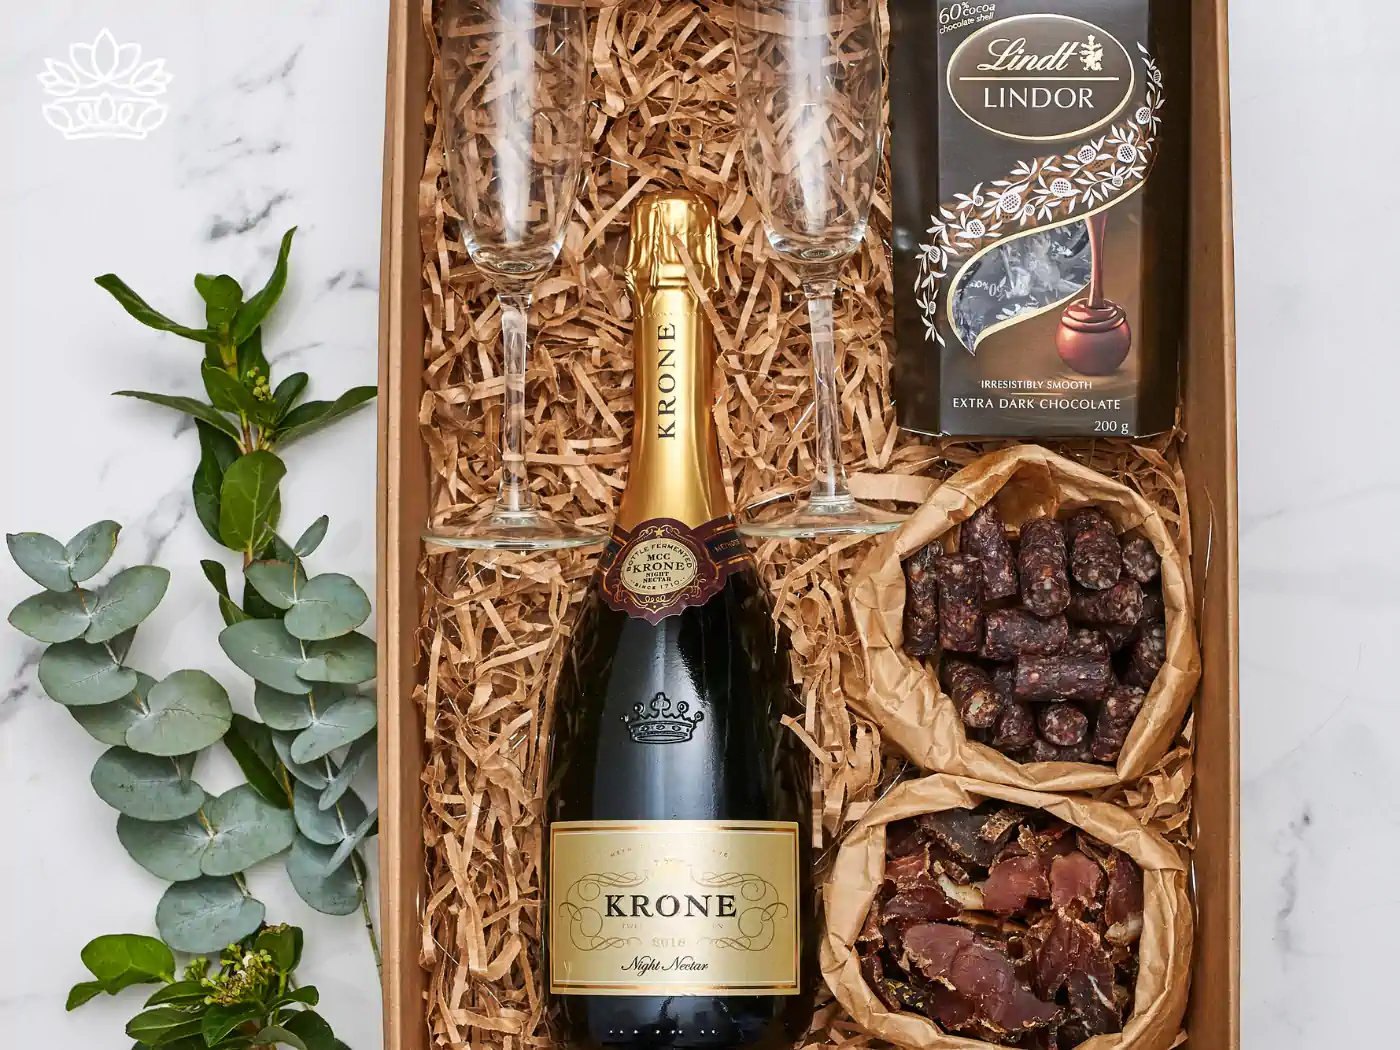 Luxury gift box containing Krone champagne, a champagne flute, Lindt extra dark chocolate, and gourmet dried meats, elegantly presented. Fabulous Flowers and Gifts - Housewarming. Delivered with Heart.